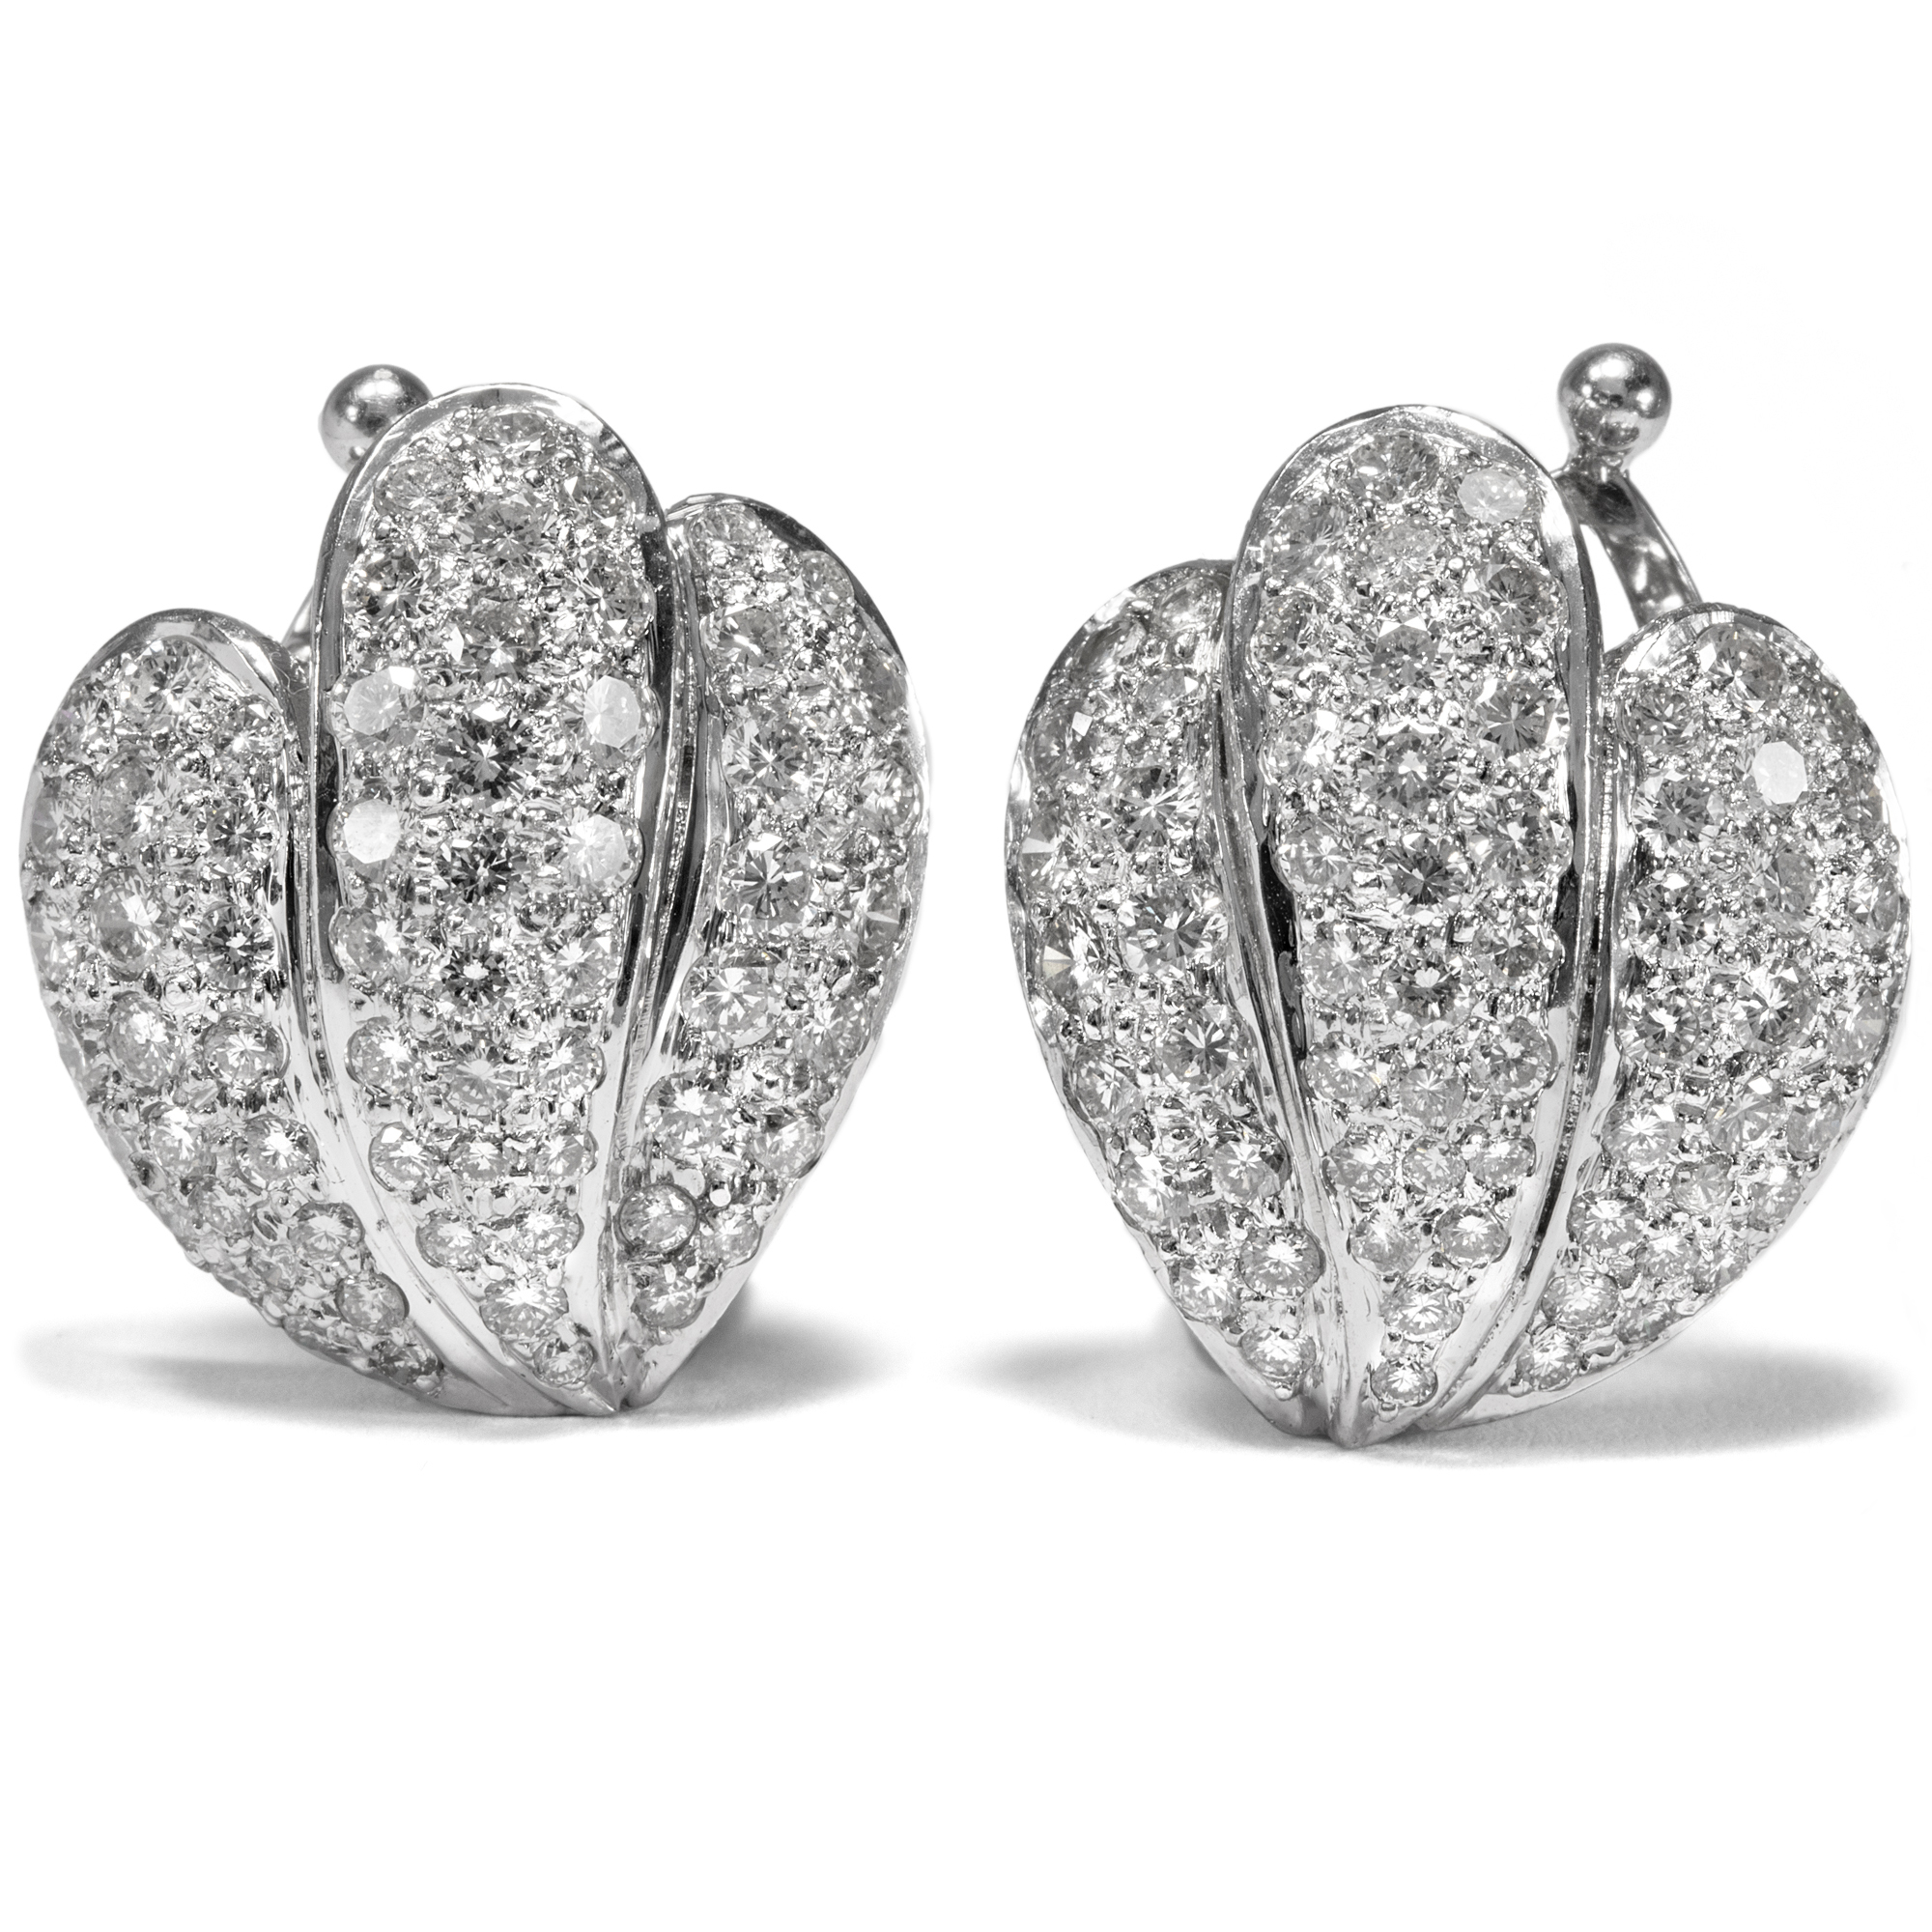 Vintage Stud Earrings with Diamonds Set in White Gold, ca. 2000